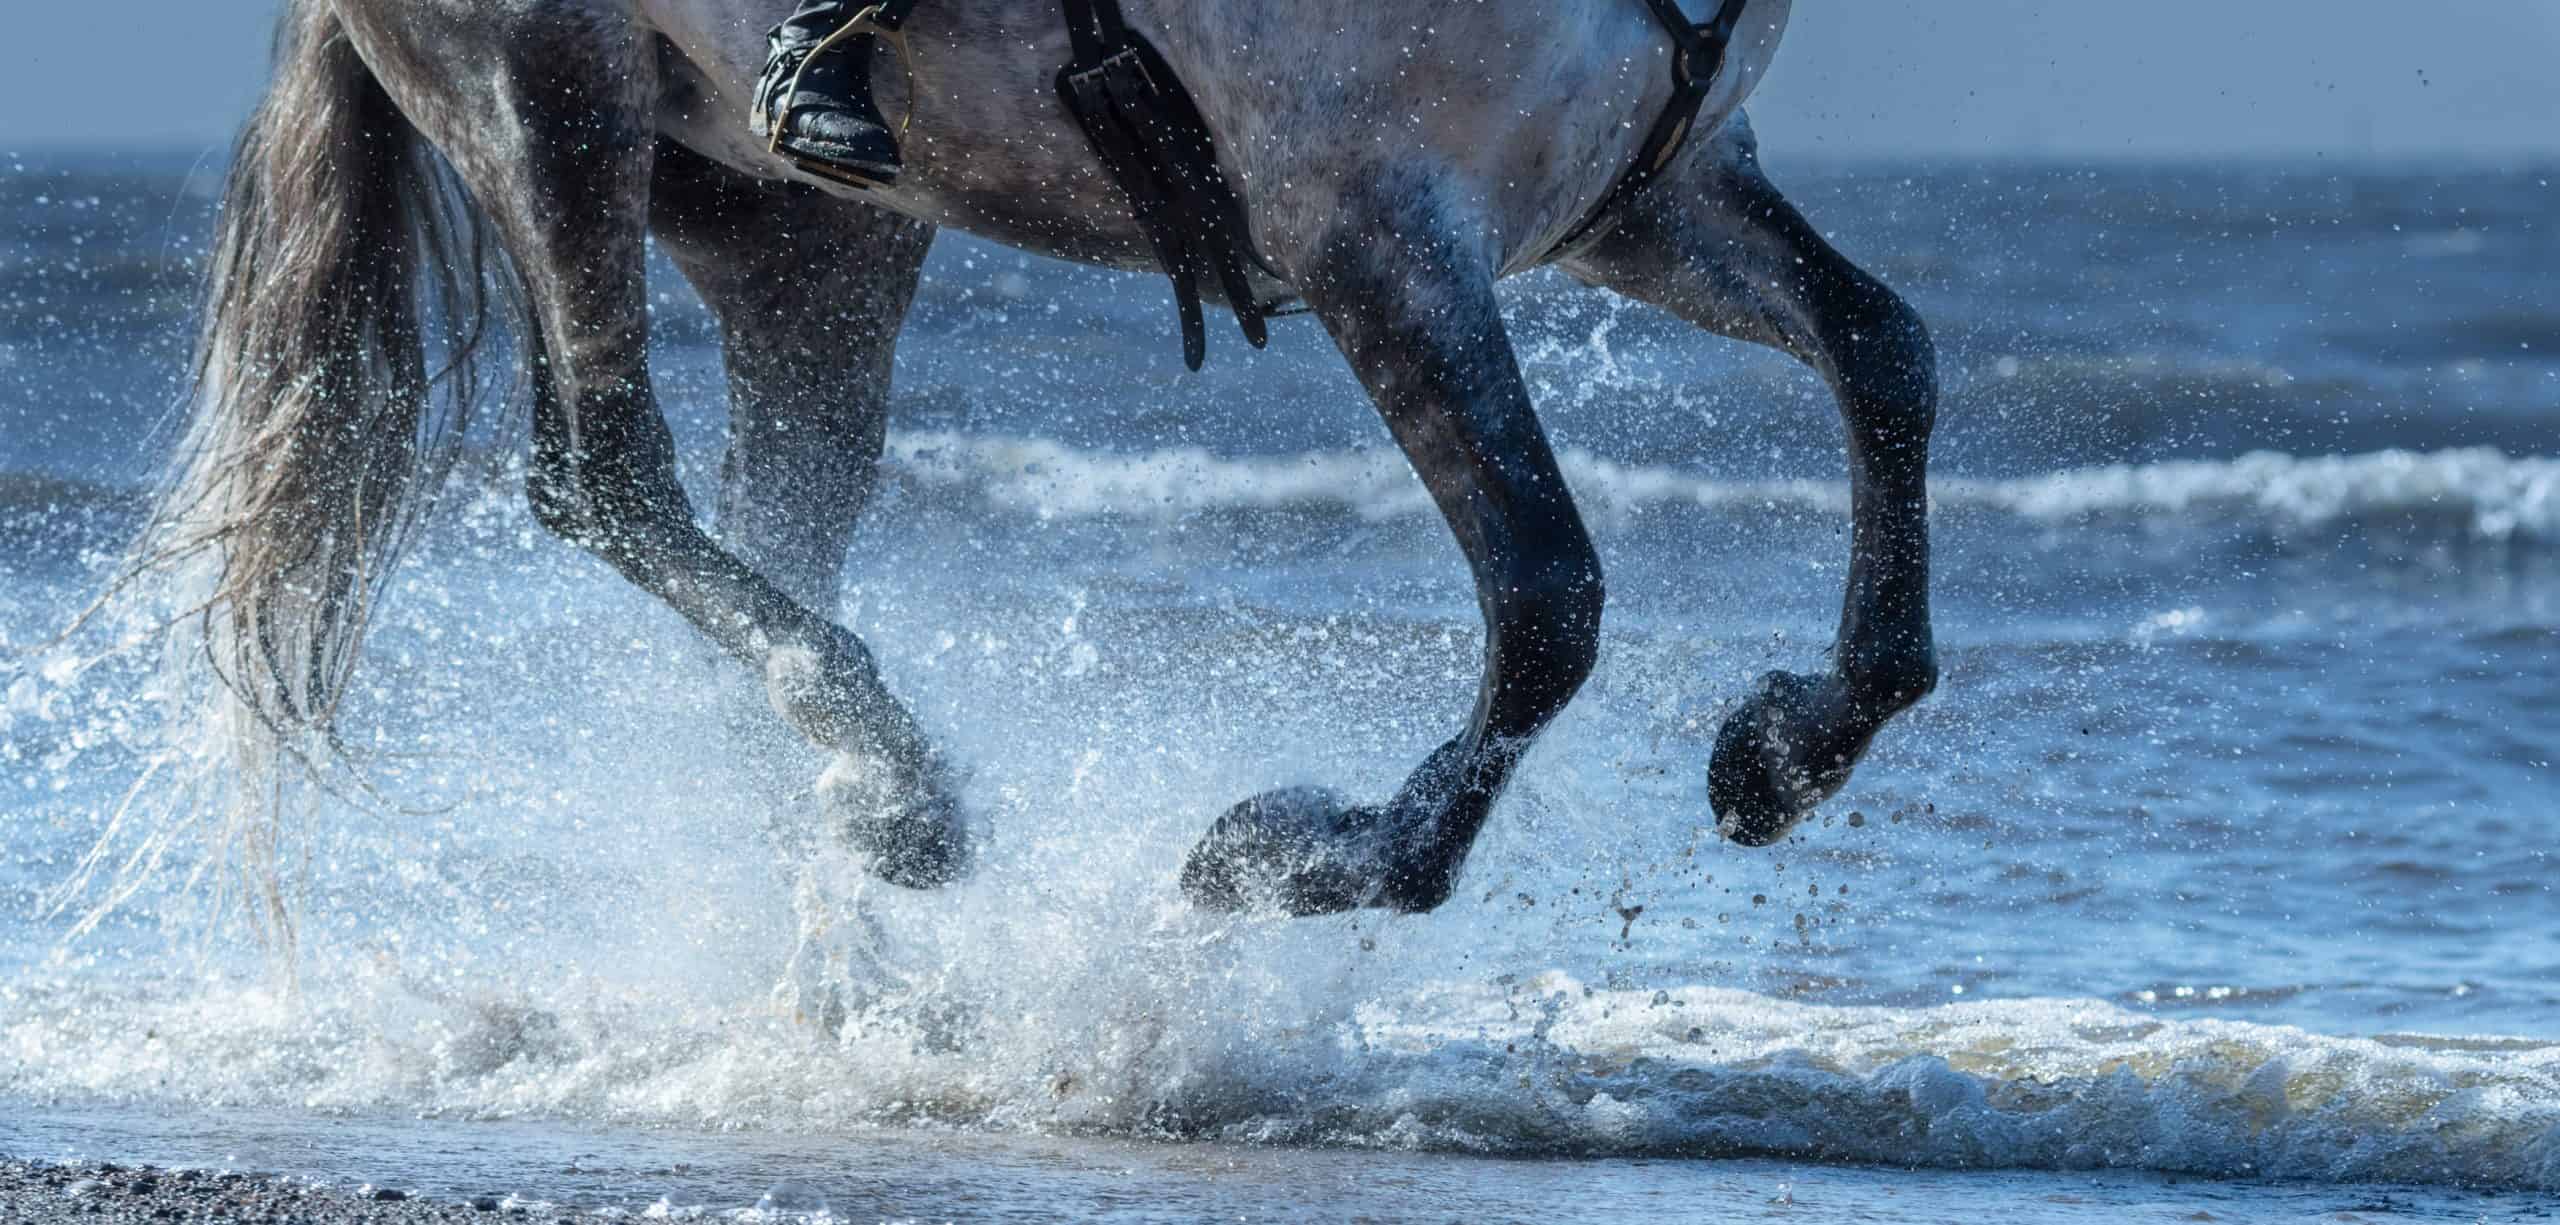 Dapple-grey horse run gallop on water. Legs of horse close up into sea with splashes.